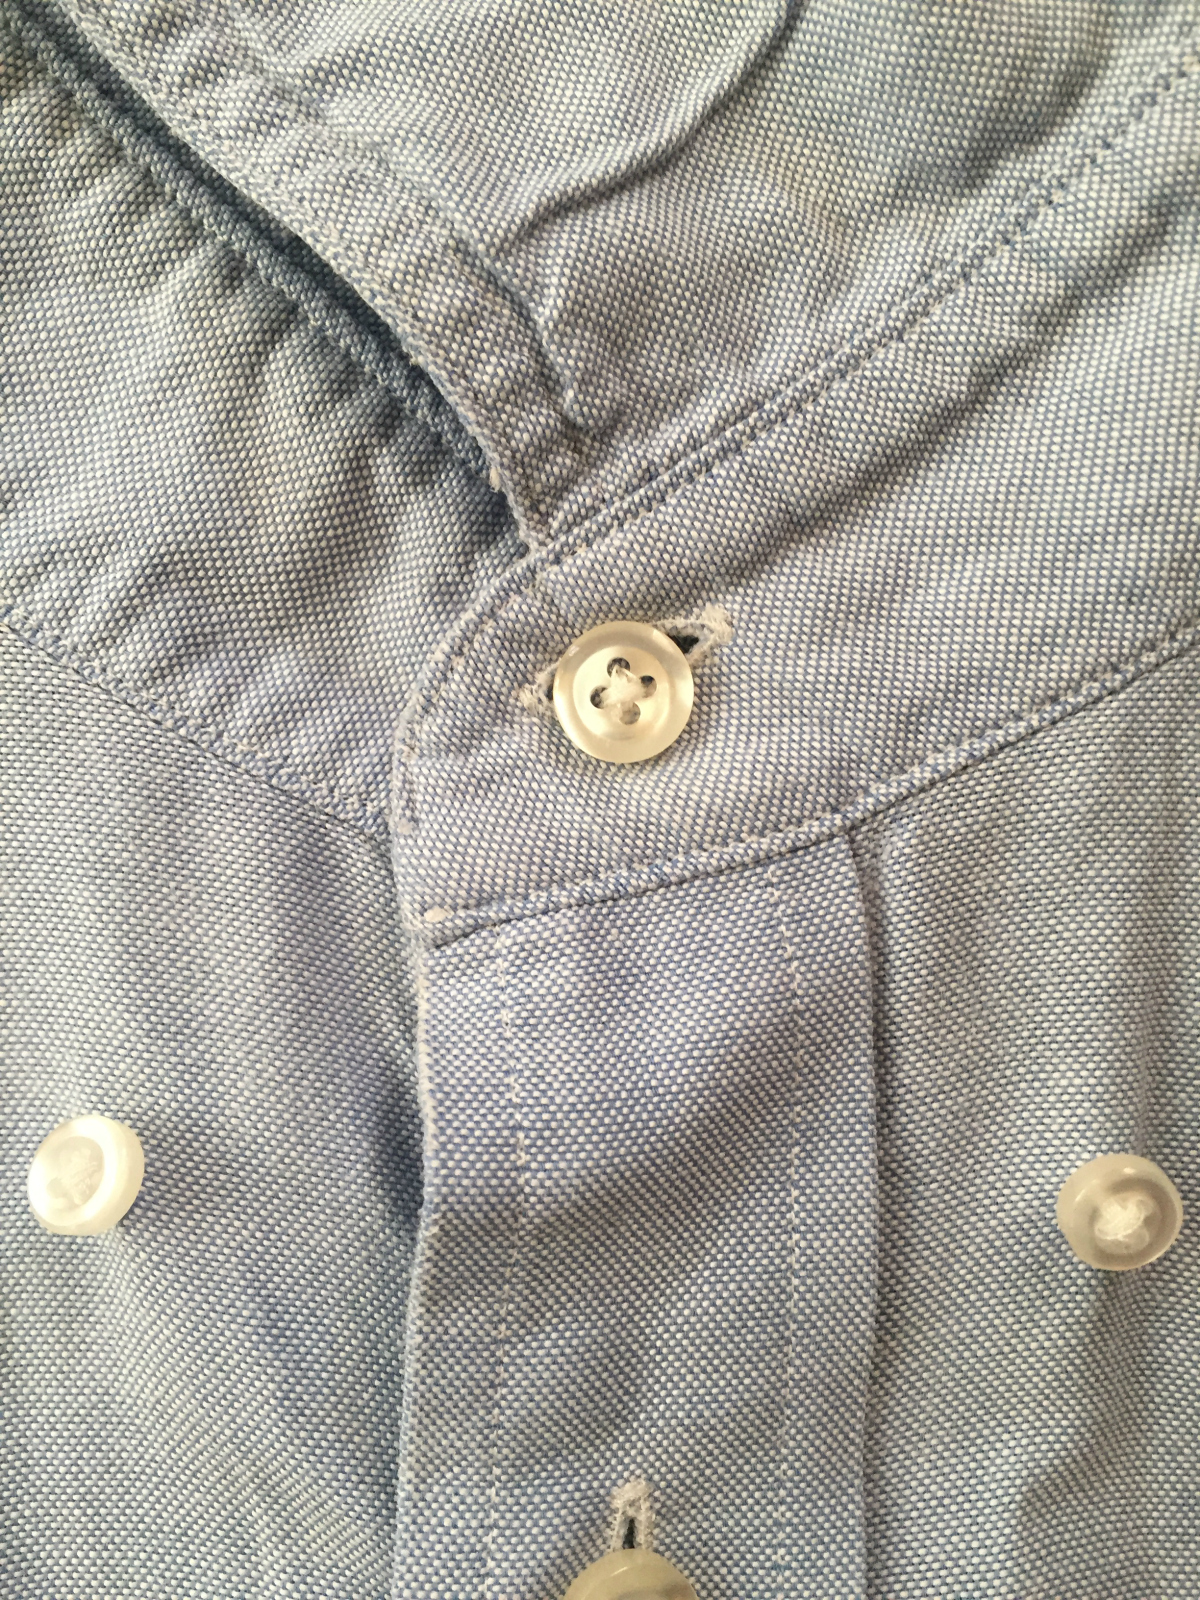 Collar Roll Variables: The Top Button